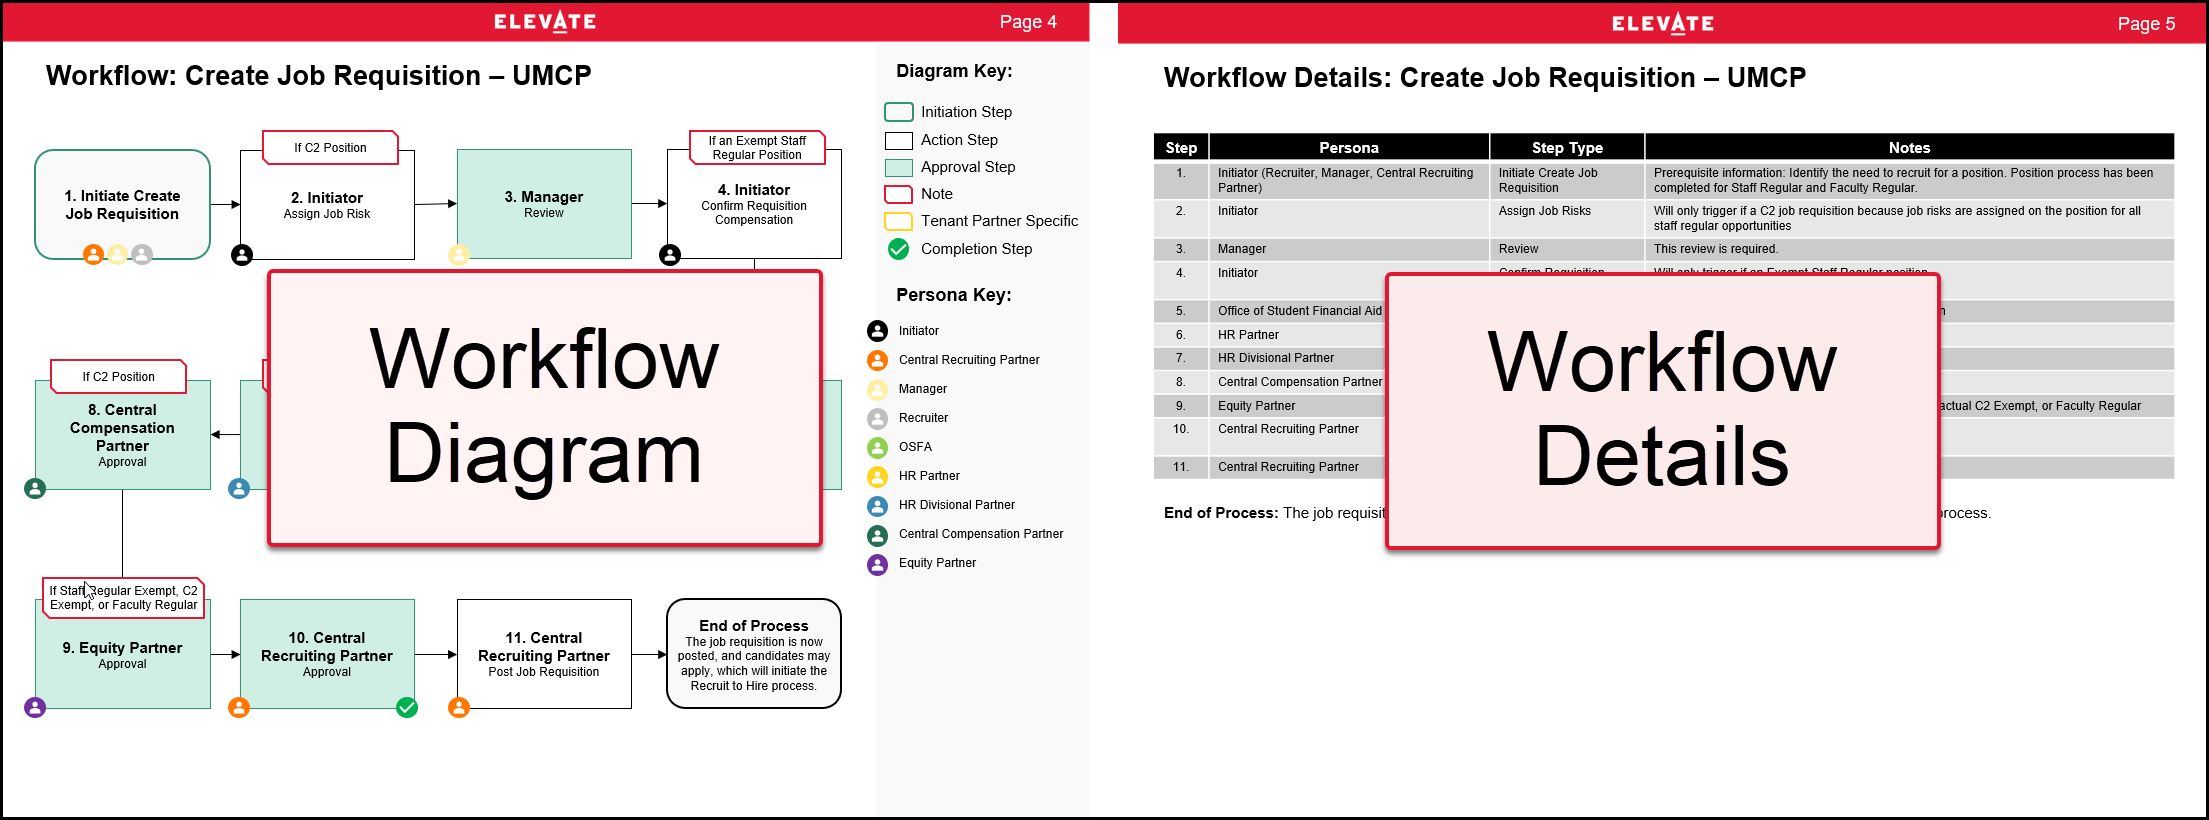 Workflow diagrams contain the visualization of a workflow. The accompanying Workflow Details pages contain the same, if not more information, in table format. Please use the text-only version of the workflow as an accessible format that only includes the tables, if needed.